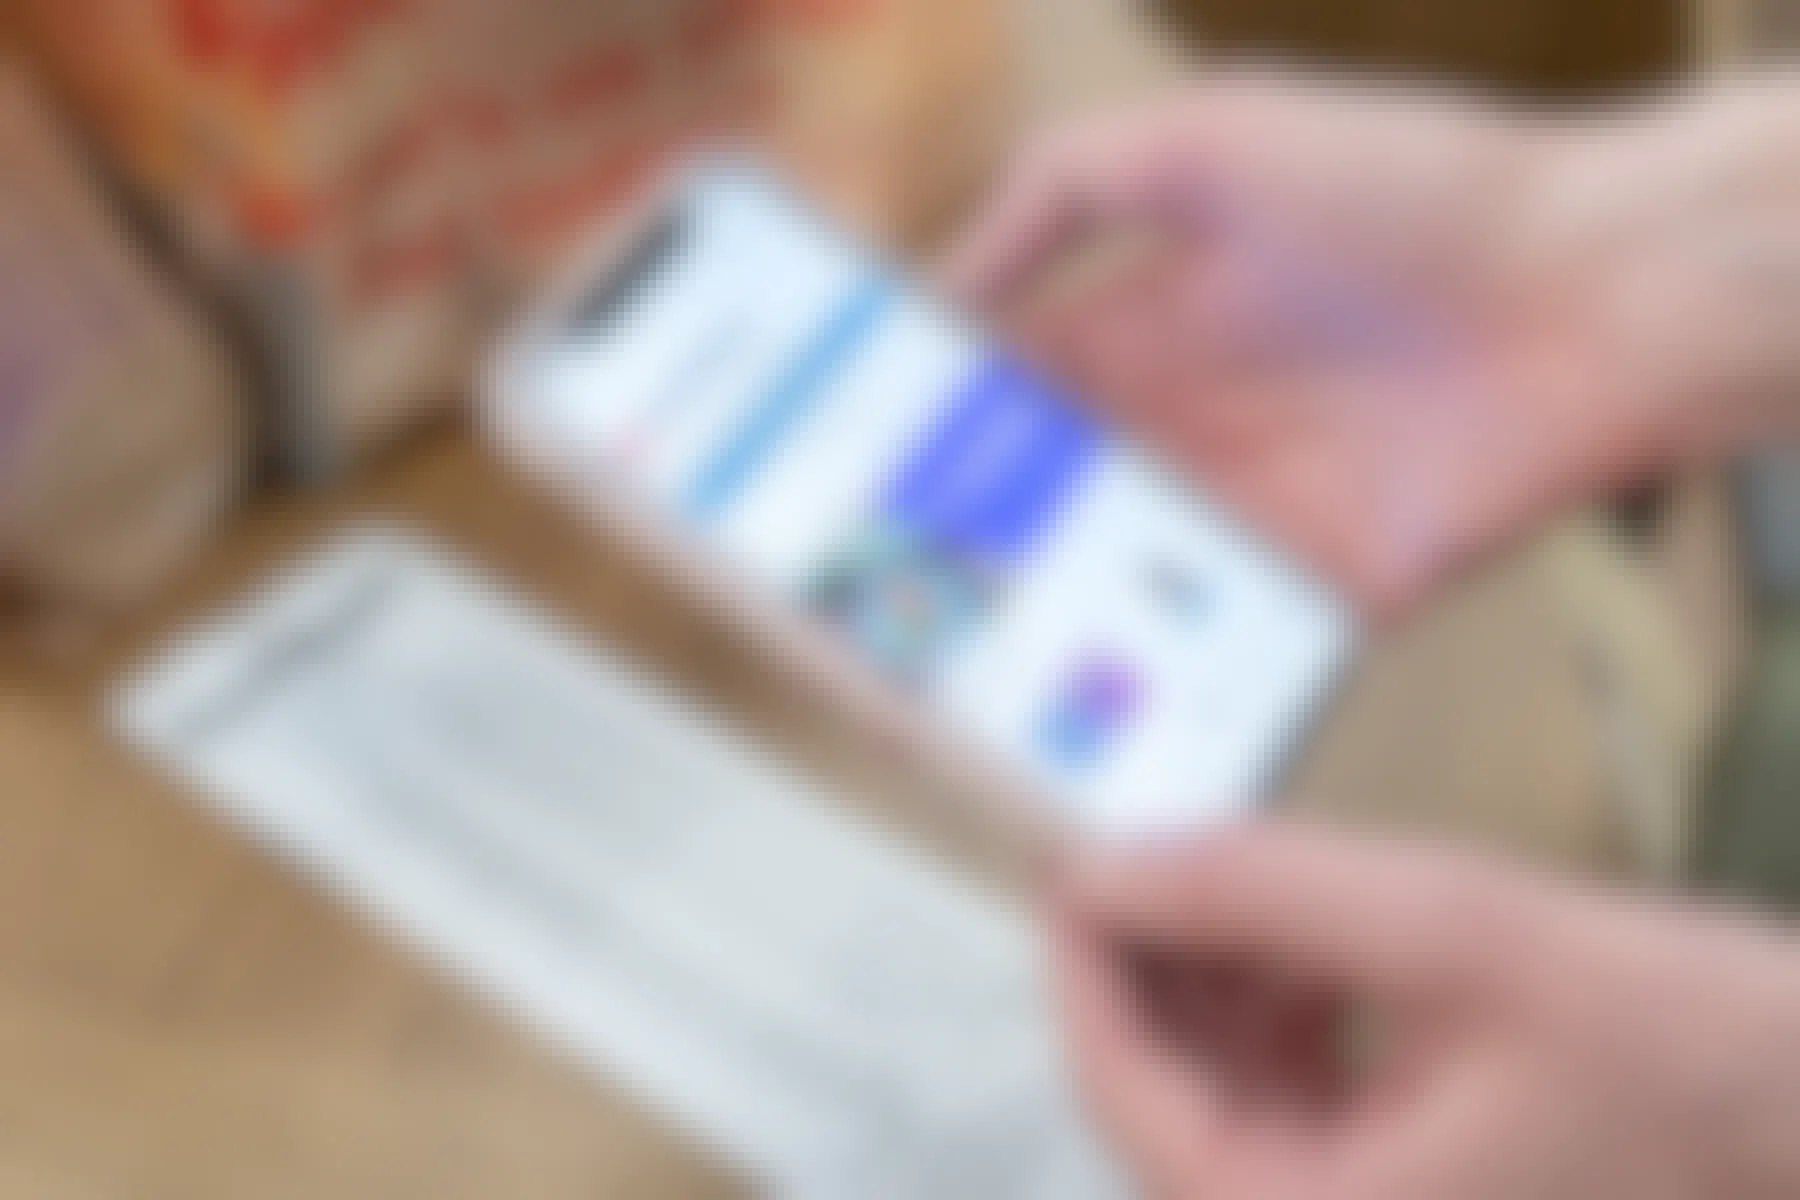 A person's hands holding an iPhone with the Ibotta mobile app open about to scan a receipt that is on a table next to two bags of groceries.